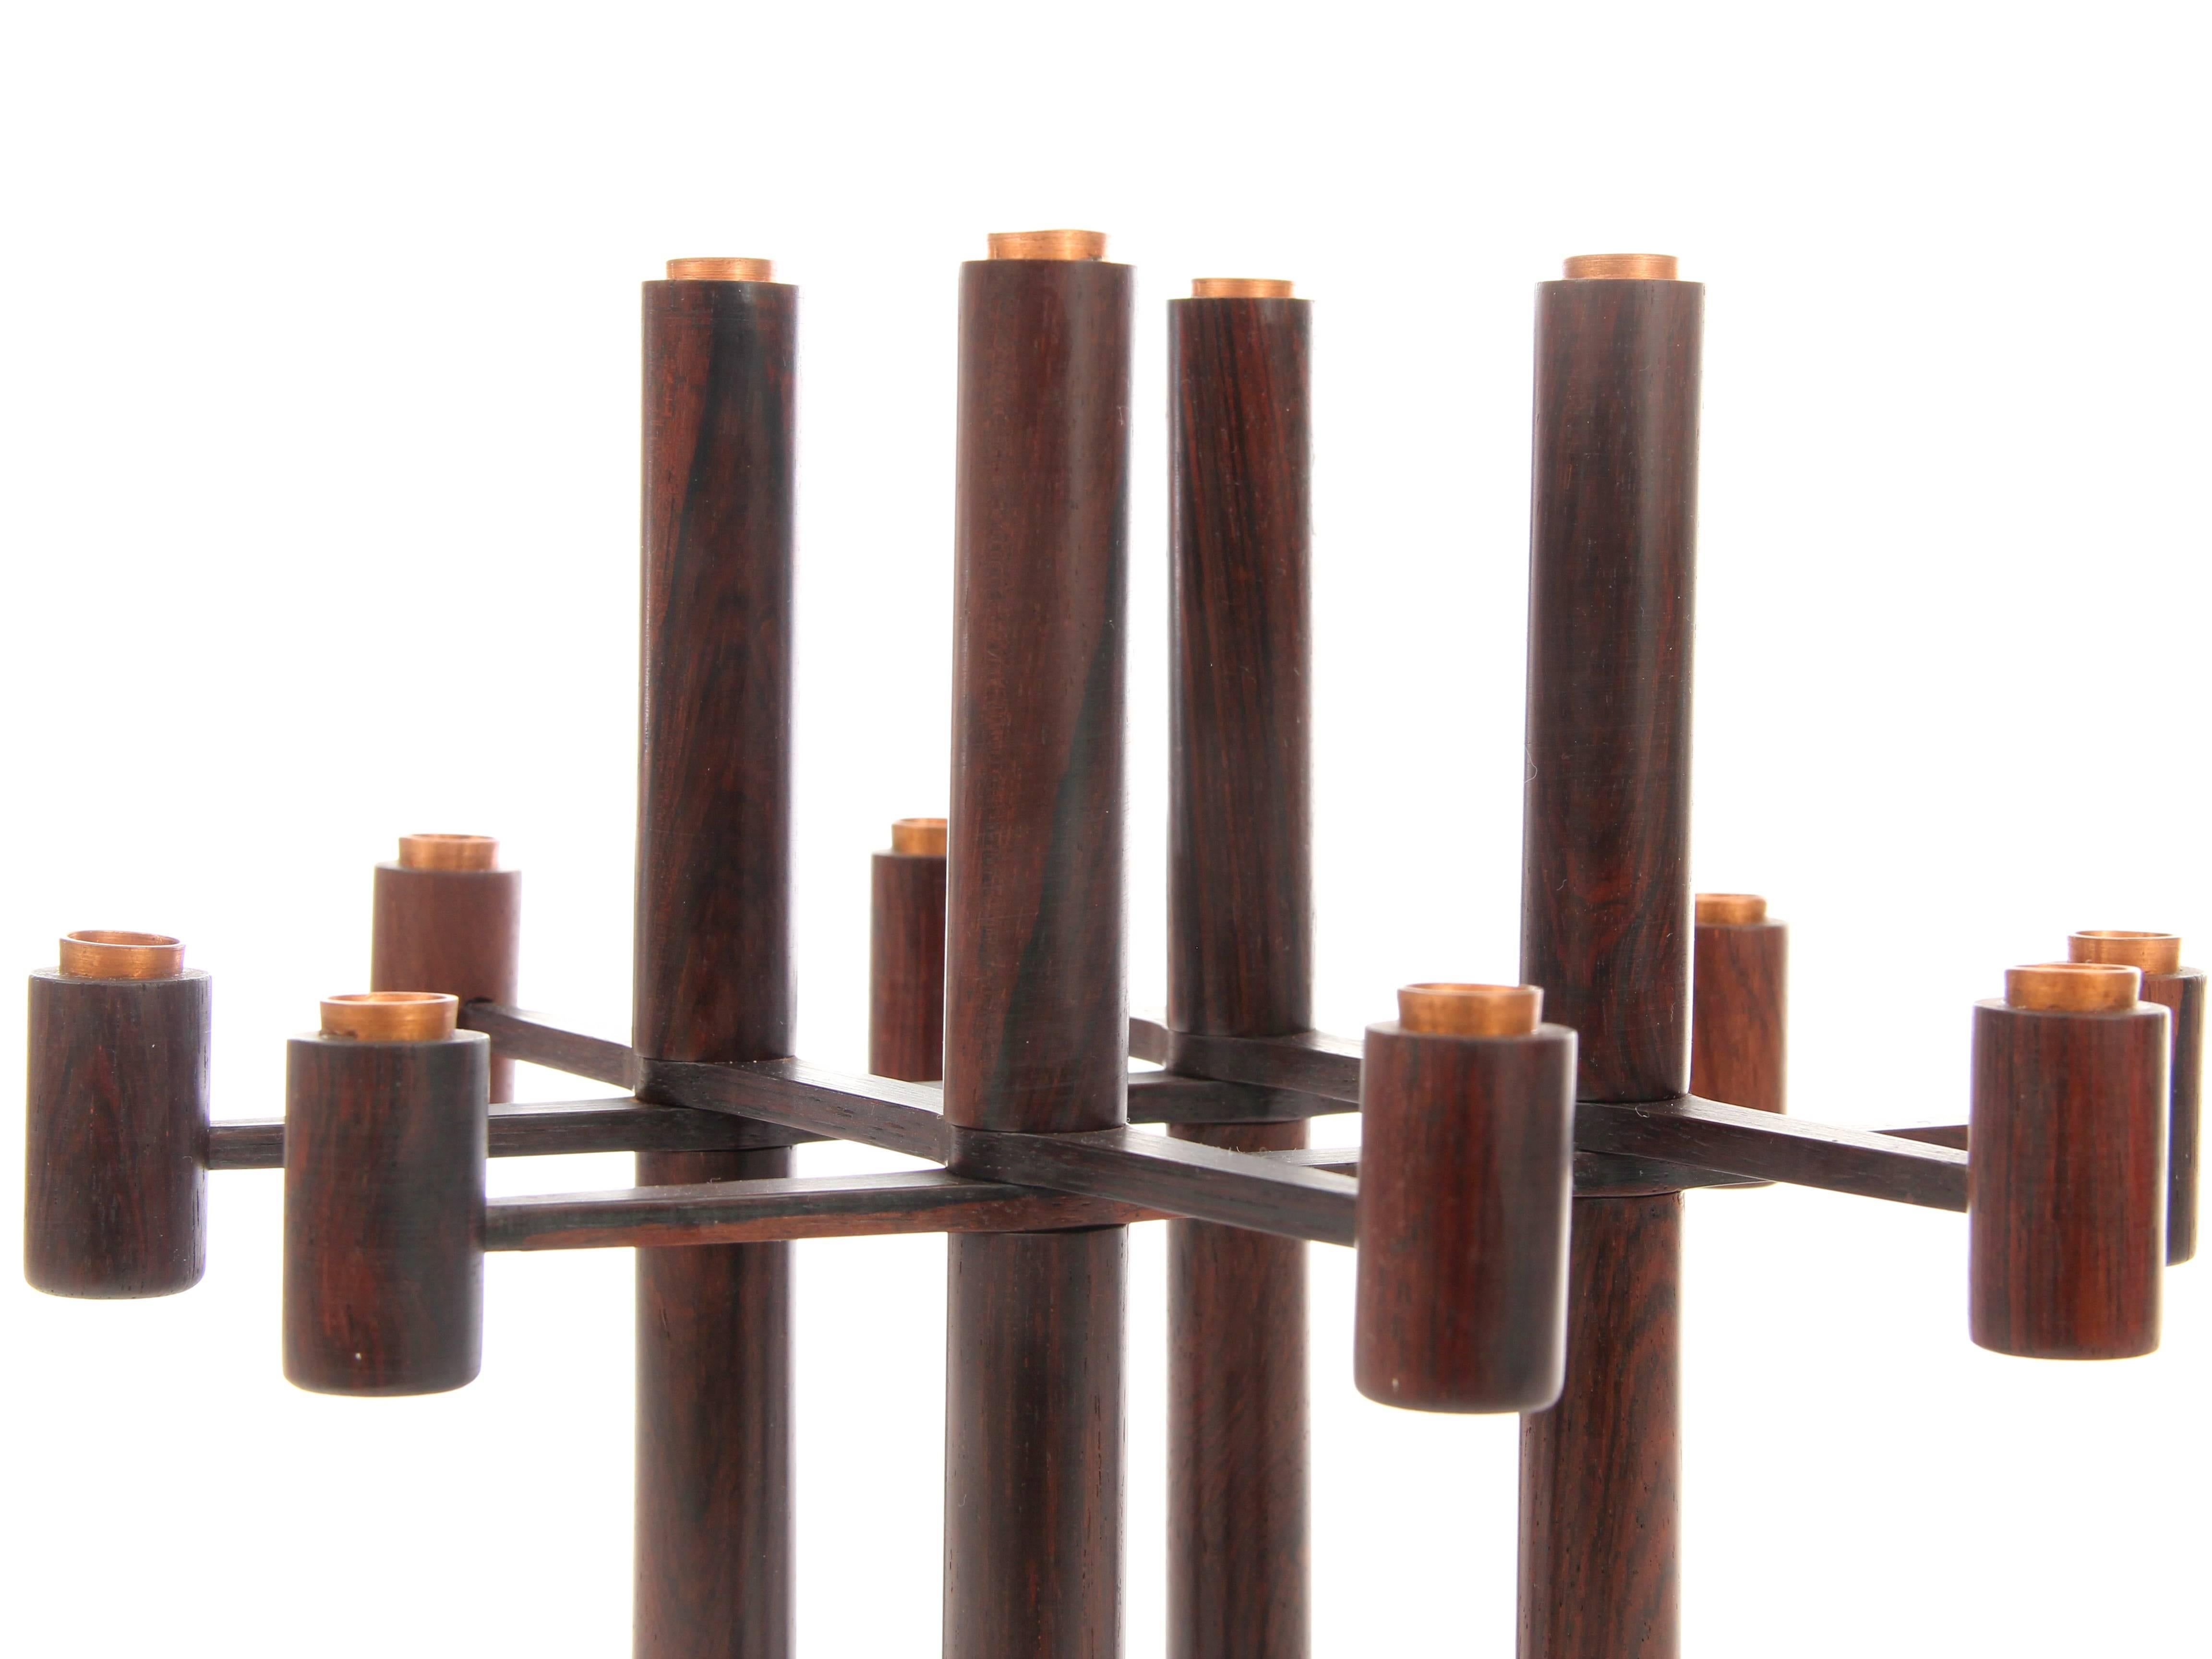 Danish Mid-Century Modern Scandinavian Folding Candle Holder in Rosewood For Sale